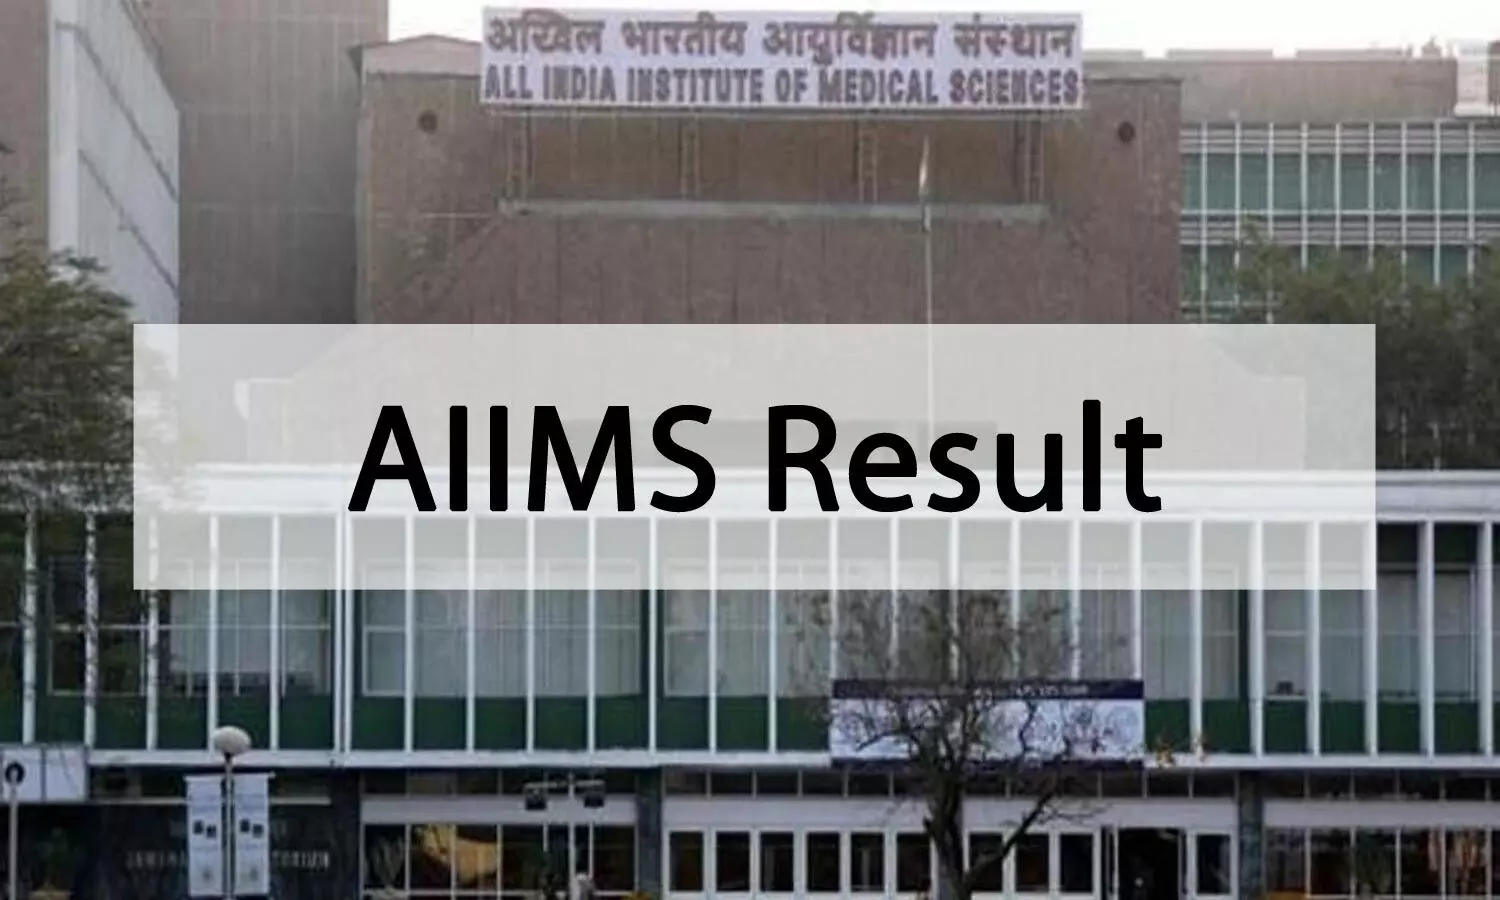 AIIMS PG 2020 Counselling: Round 1 results Declared, details